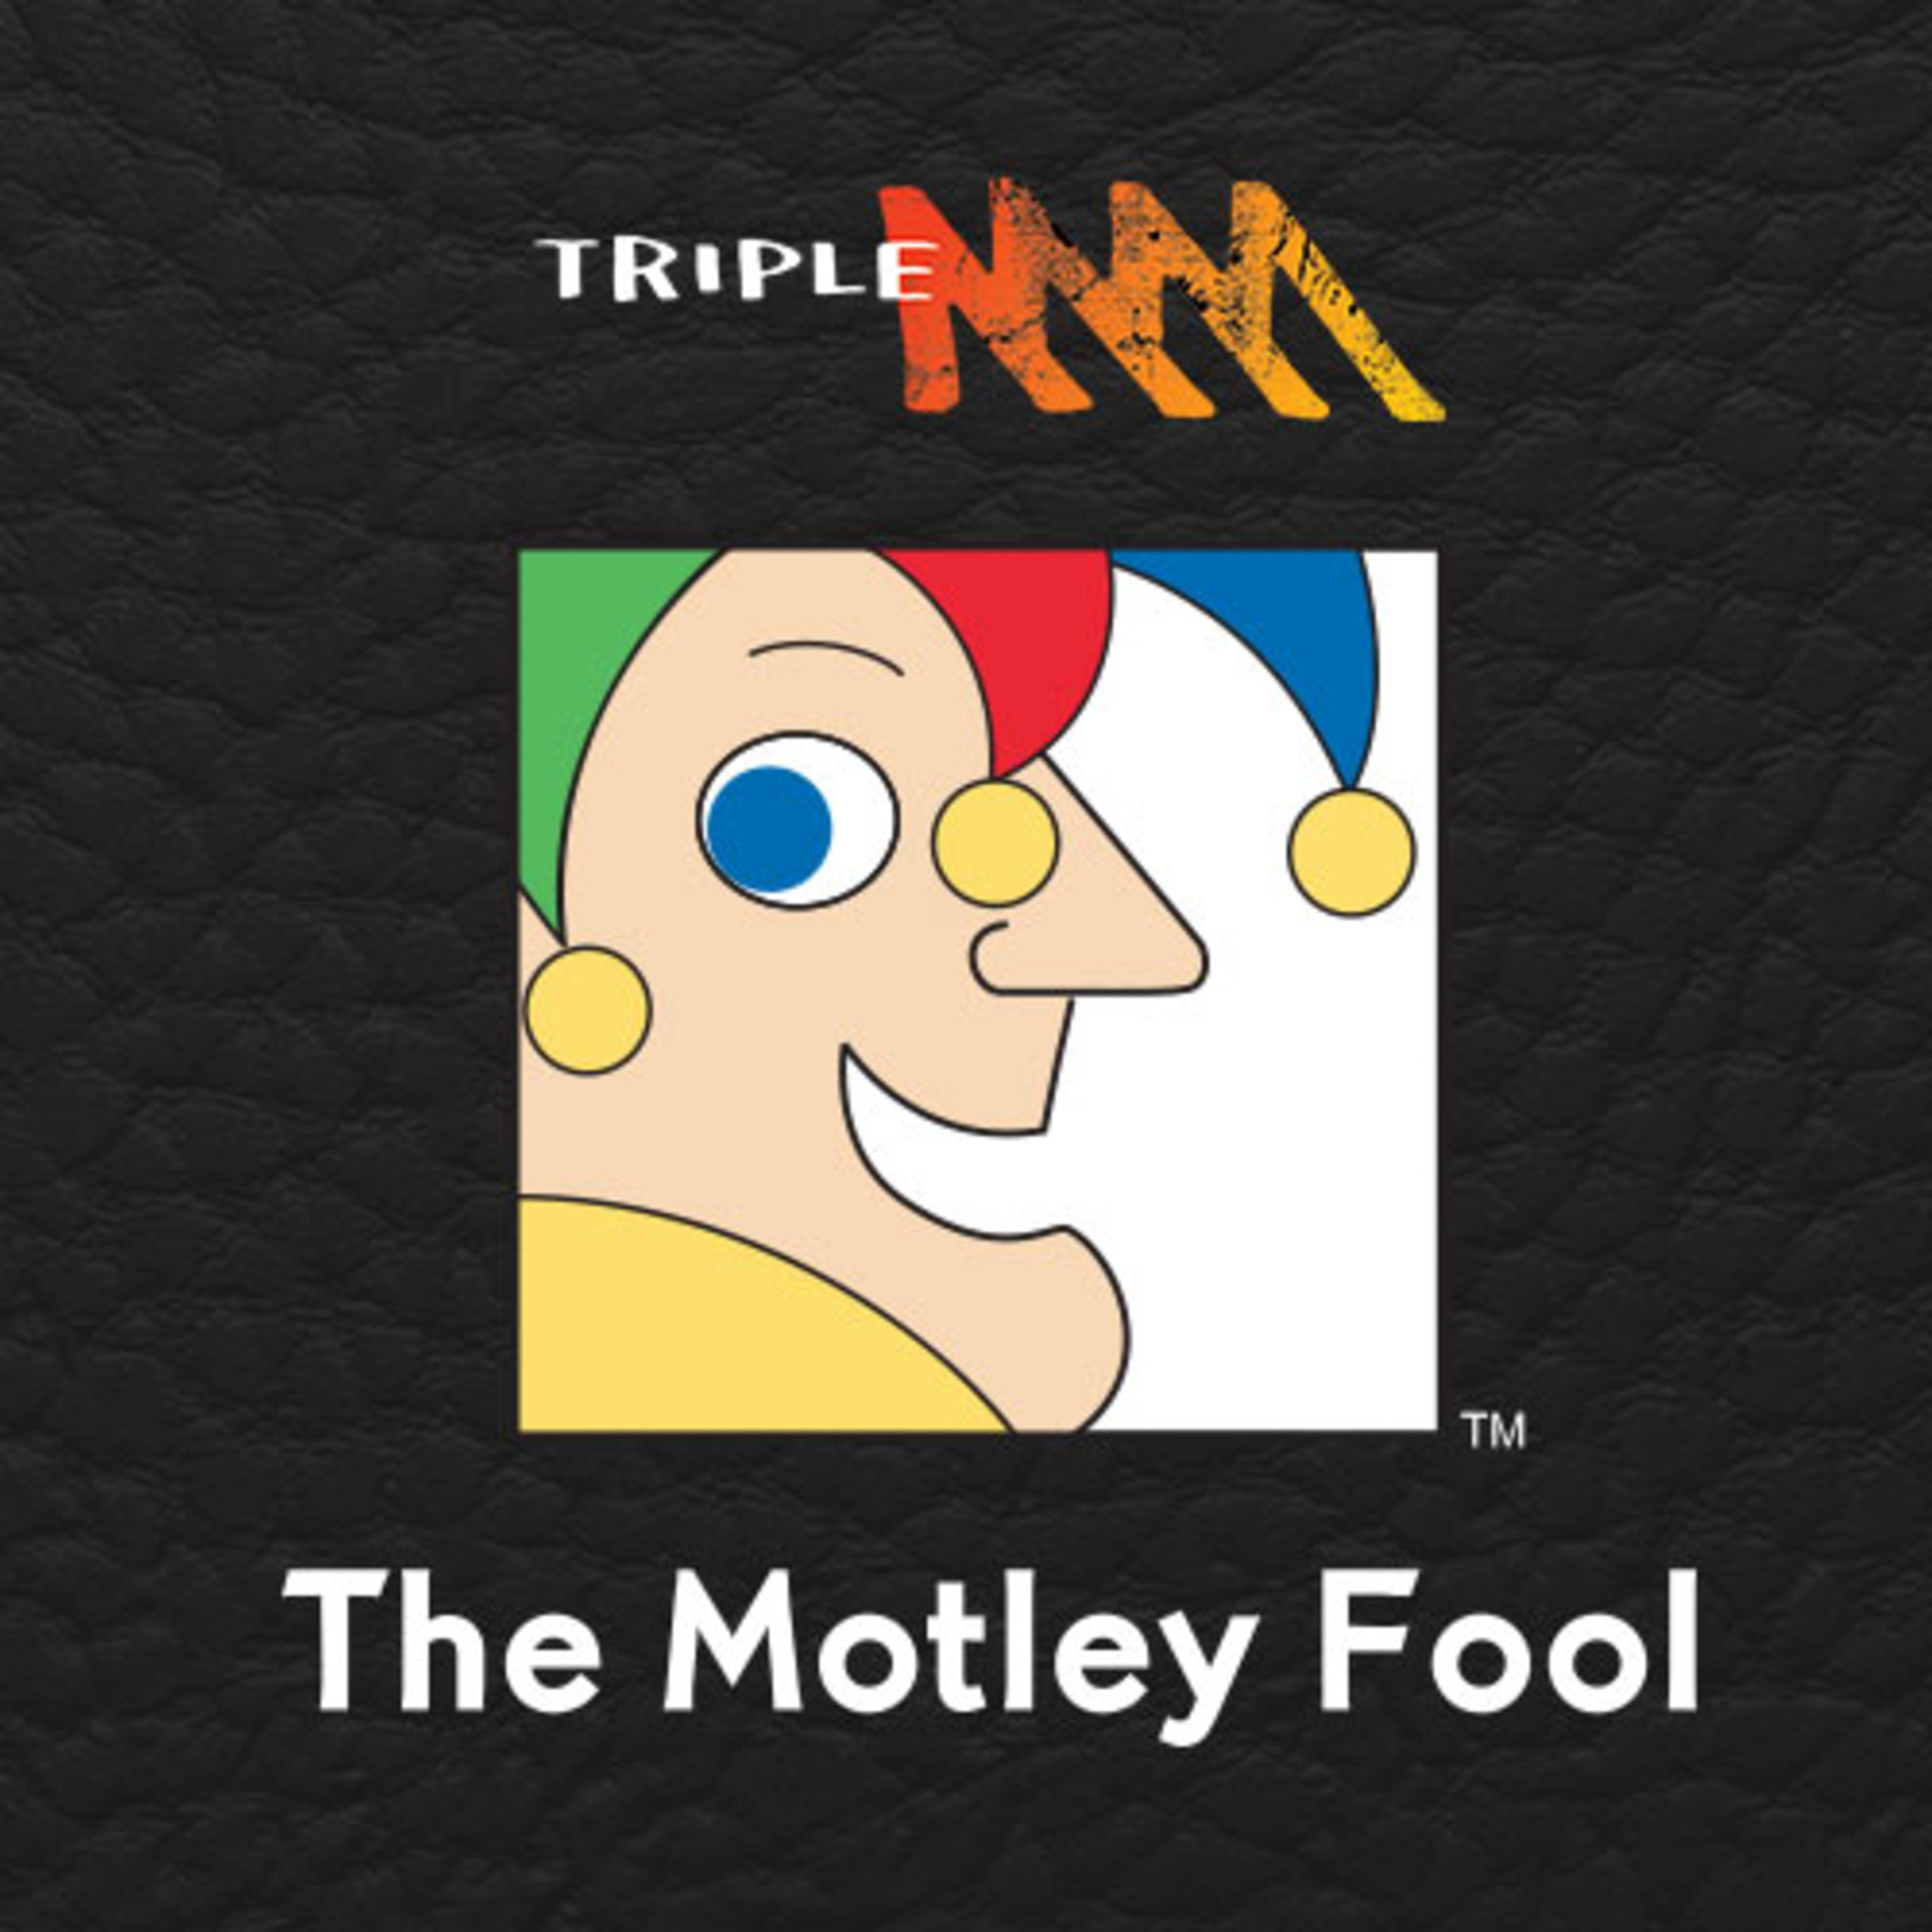 The worst financial idea ever, Garry Harvey is taking on Afterpay, Myer's negative sales growth still equals profit - Episode 175 September 6 - Triple M's Motley Fool Money